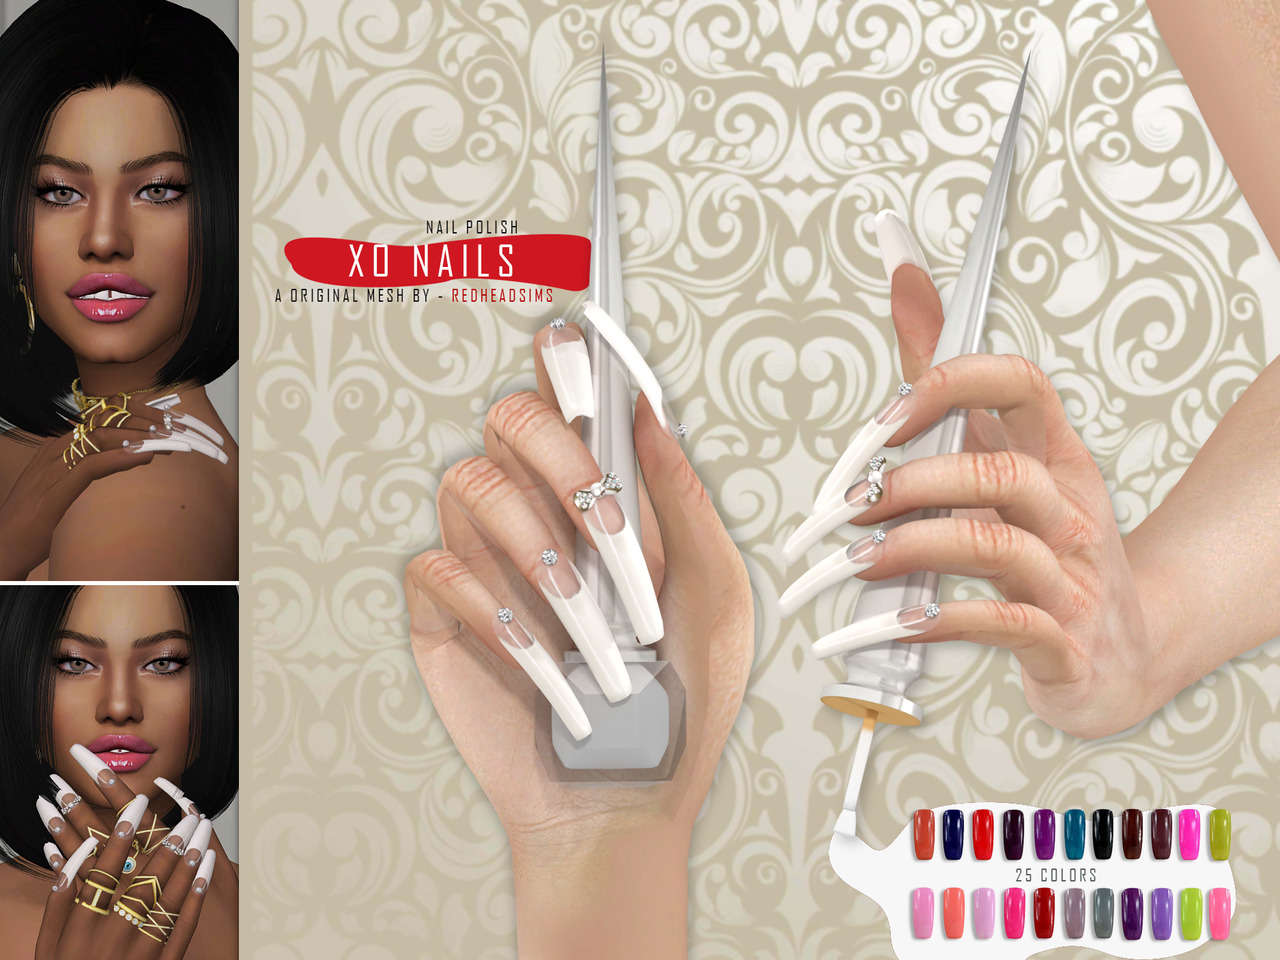 10. "Sims 3 Nail Art Custom Content" - wide 1